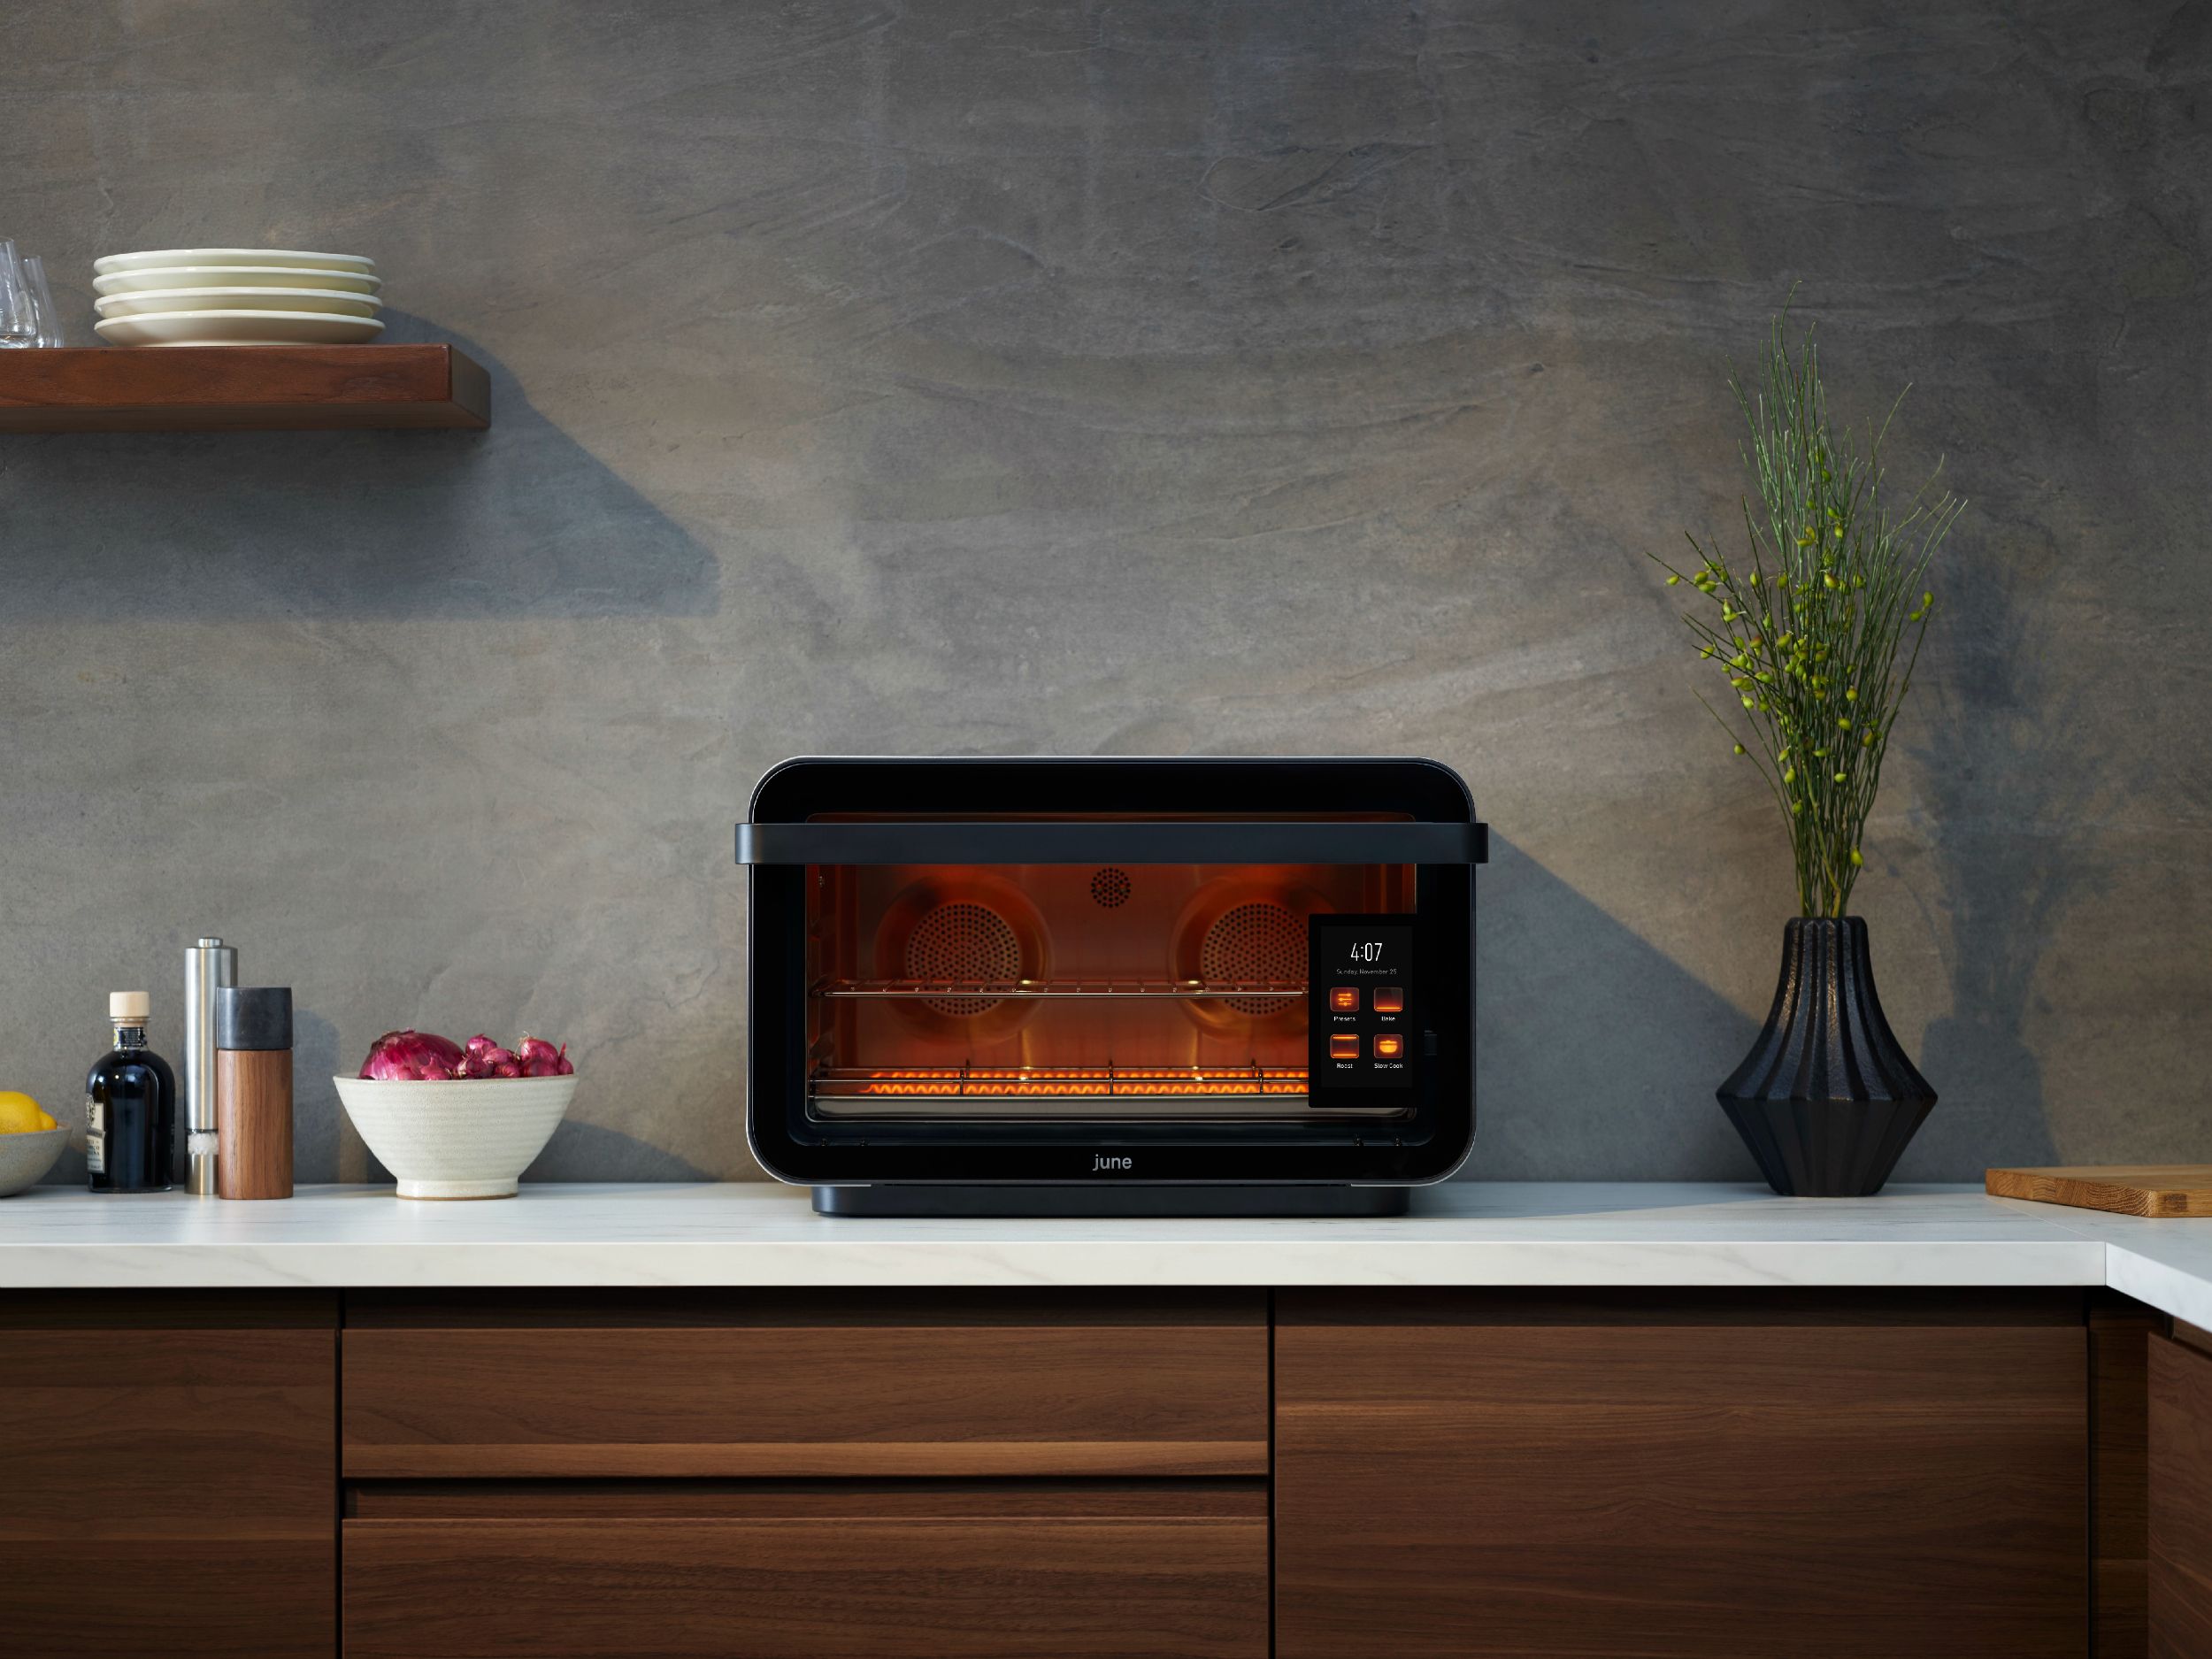 The New Smart June Oven Has Seven Kitchen Appliances In One